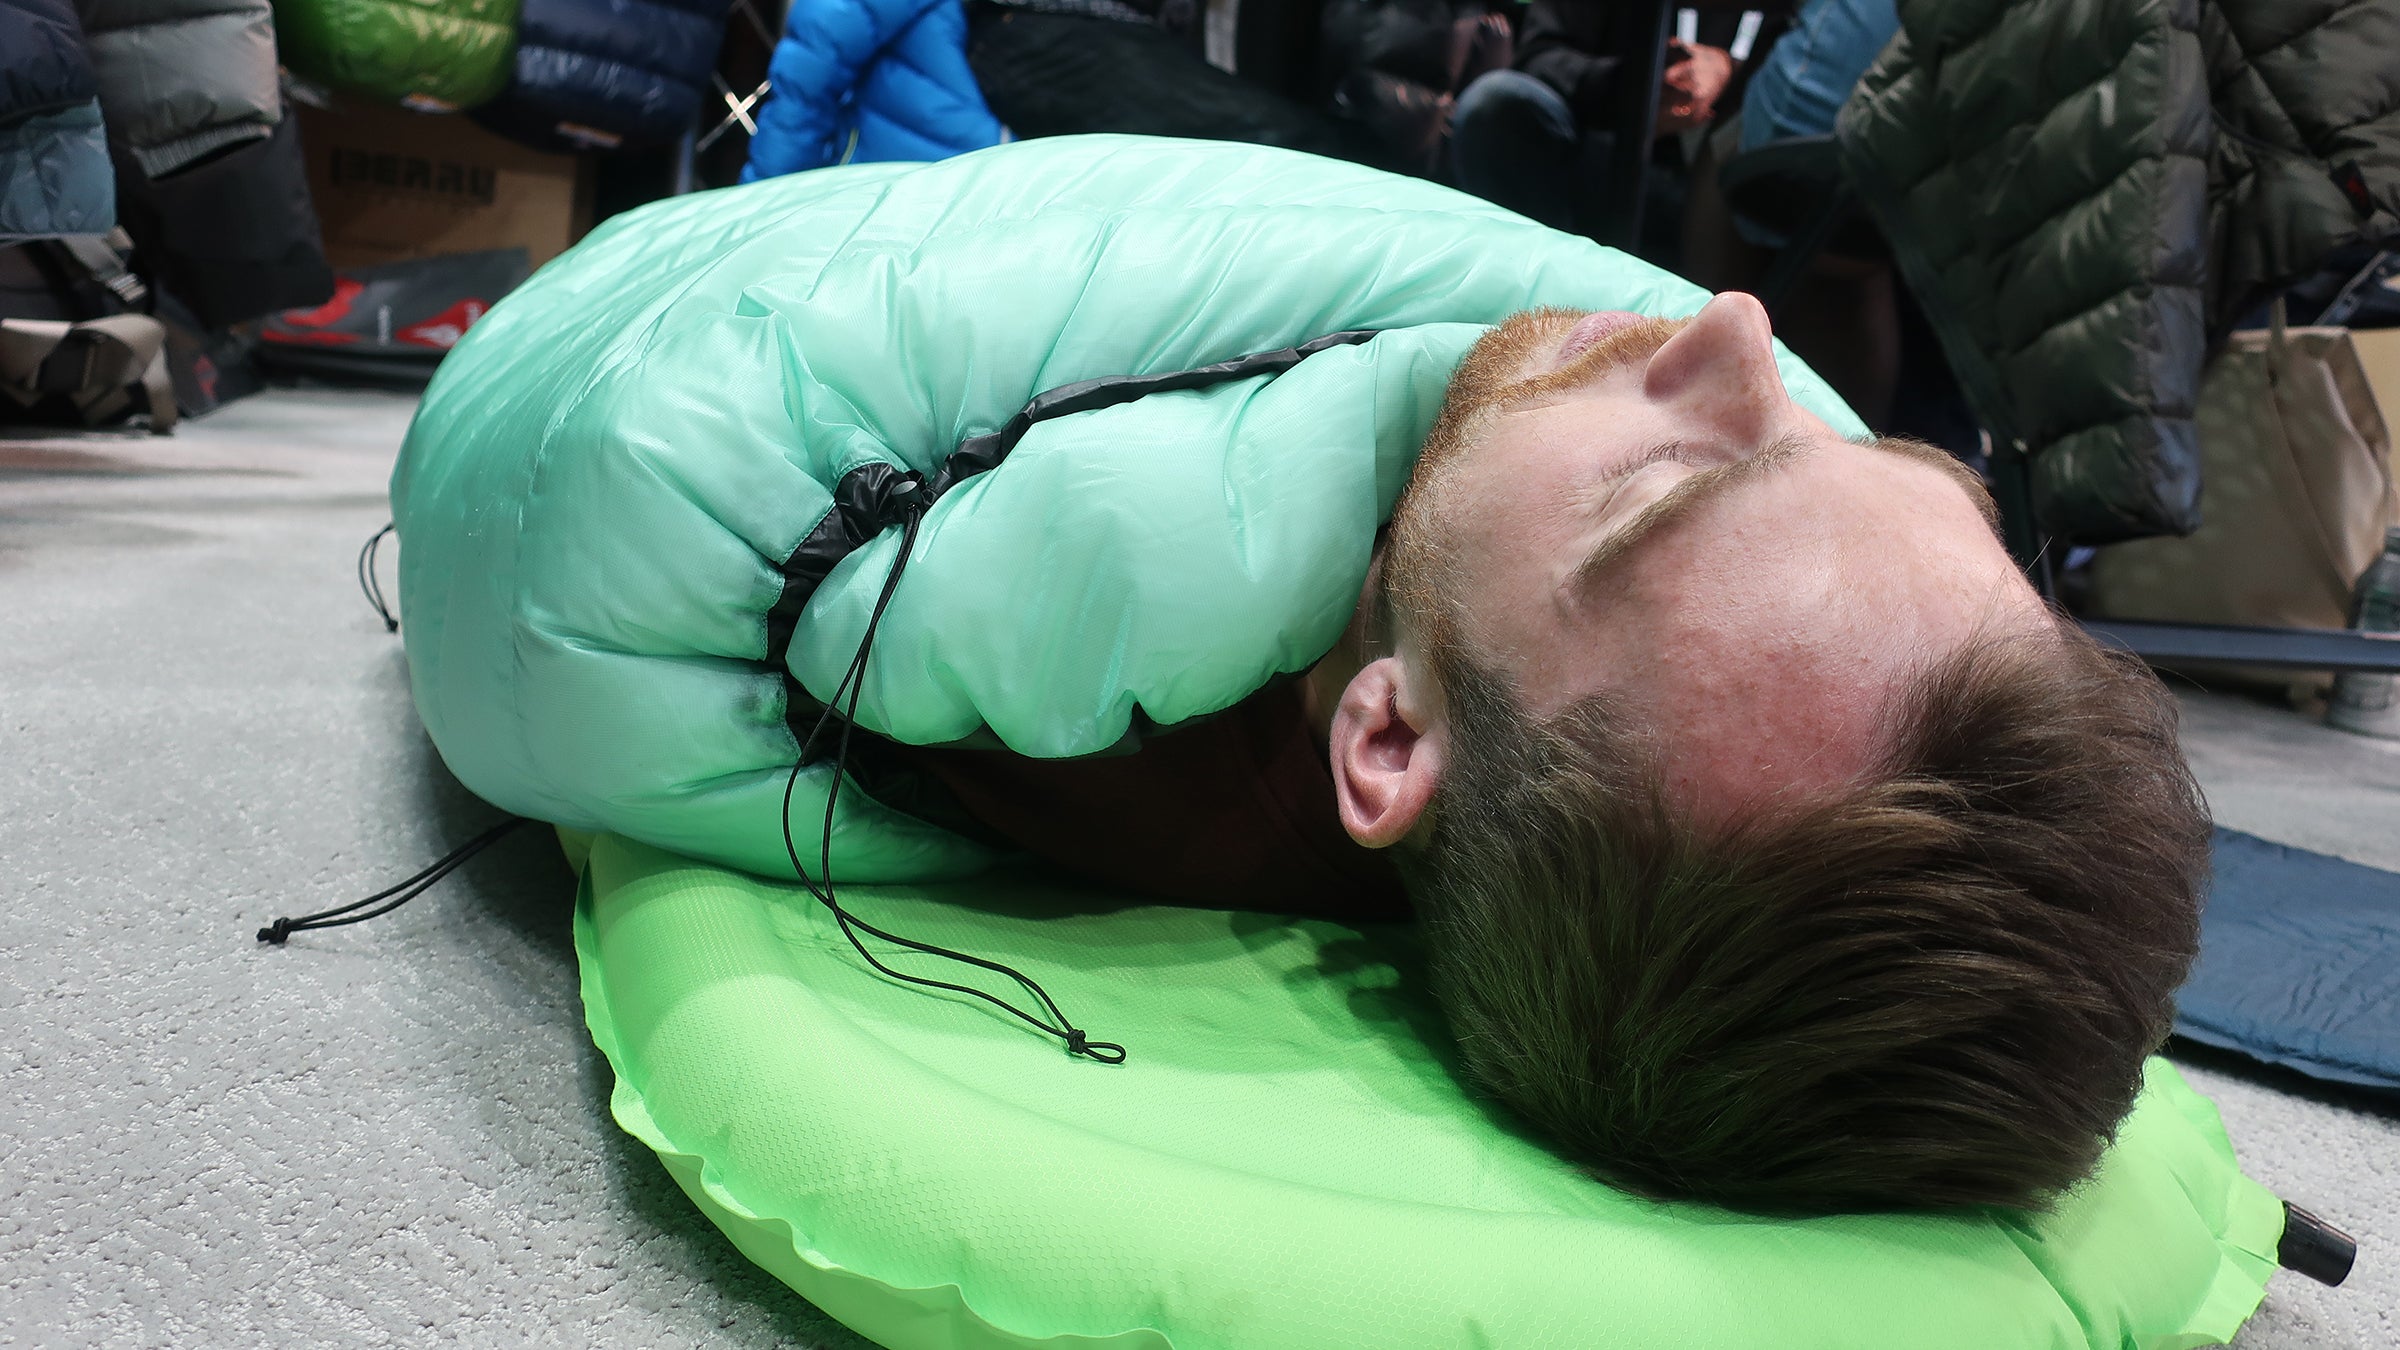 Alpinlite: The Best Sleeping Bag for Extreme Conditions?